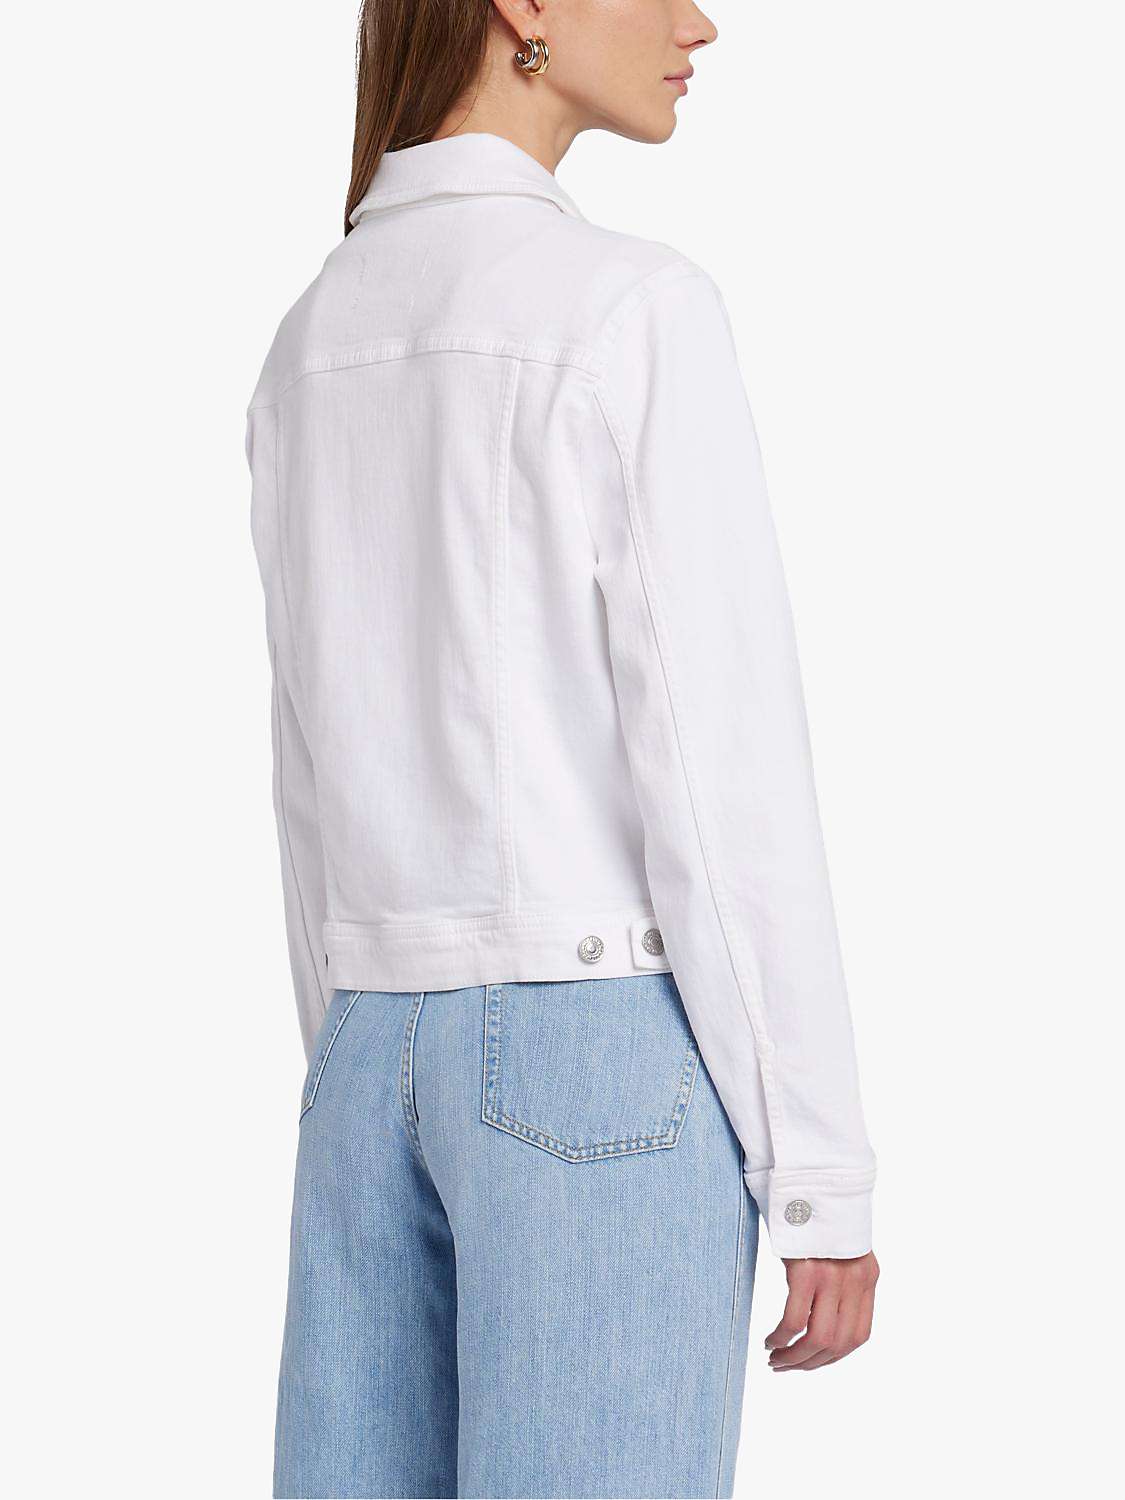 Buy 7 For All Mankind Classic Trucker Jacket, White Online at johnlewis.com